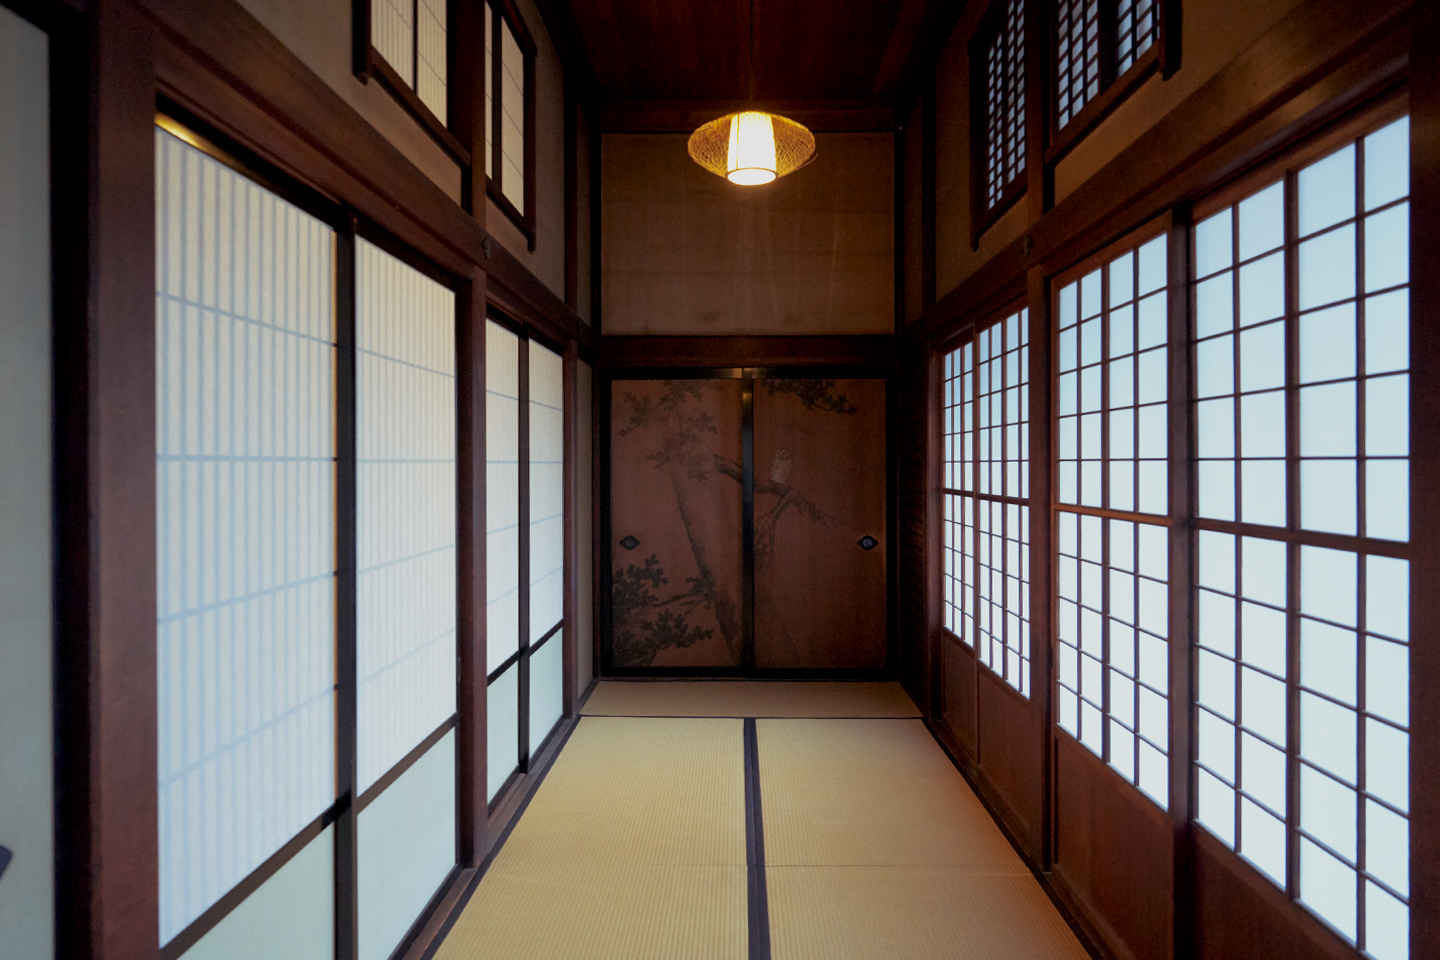 【Edo Tokyo Rethink】The Former Iwasaki House Garden: The Harmony of Tradition and Innovation, Intertwined